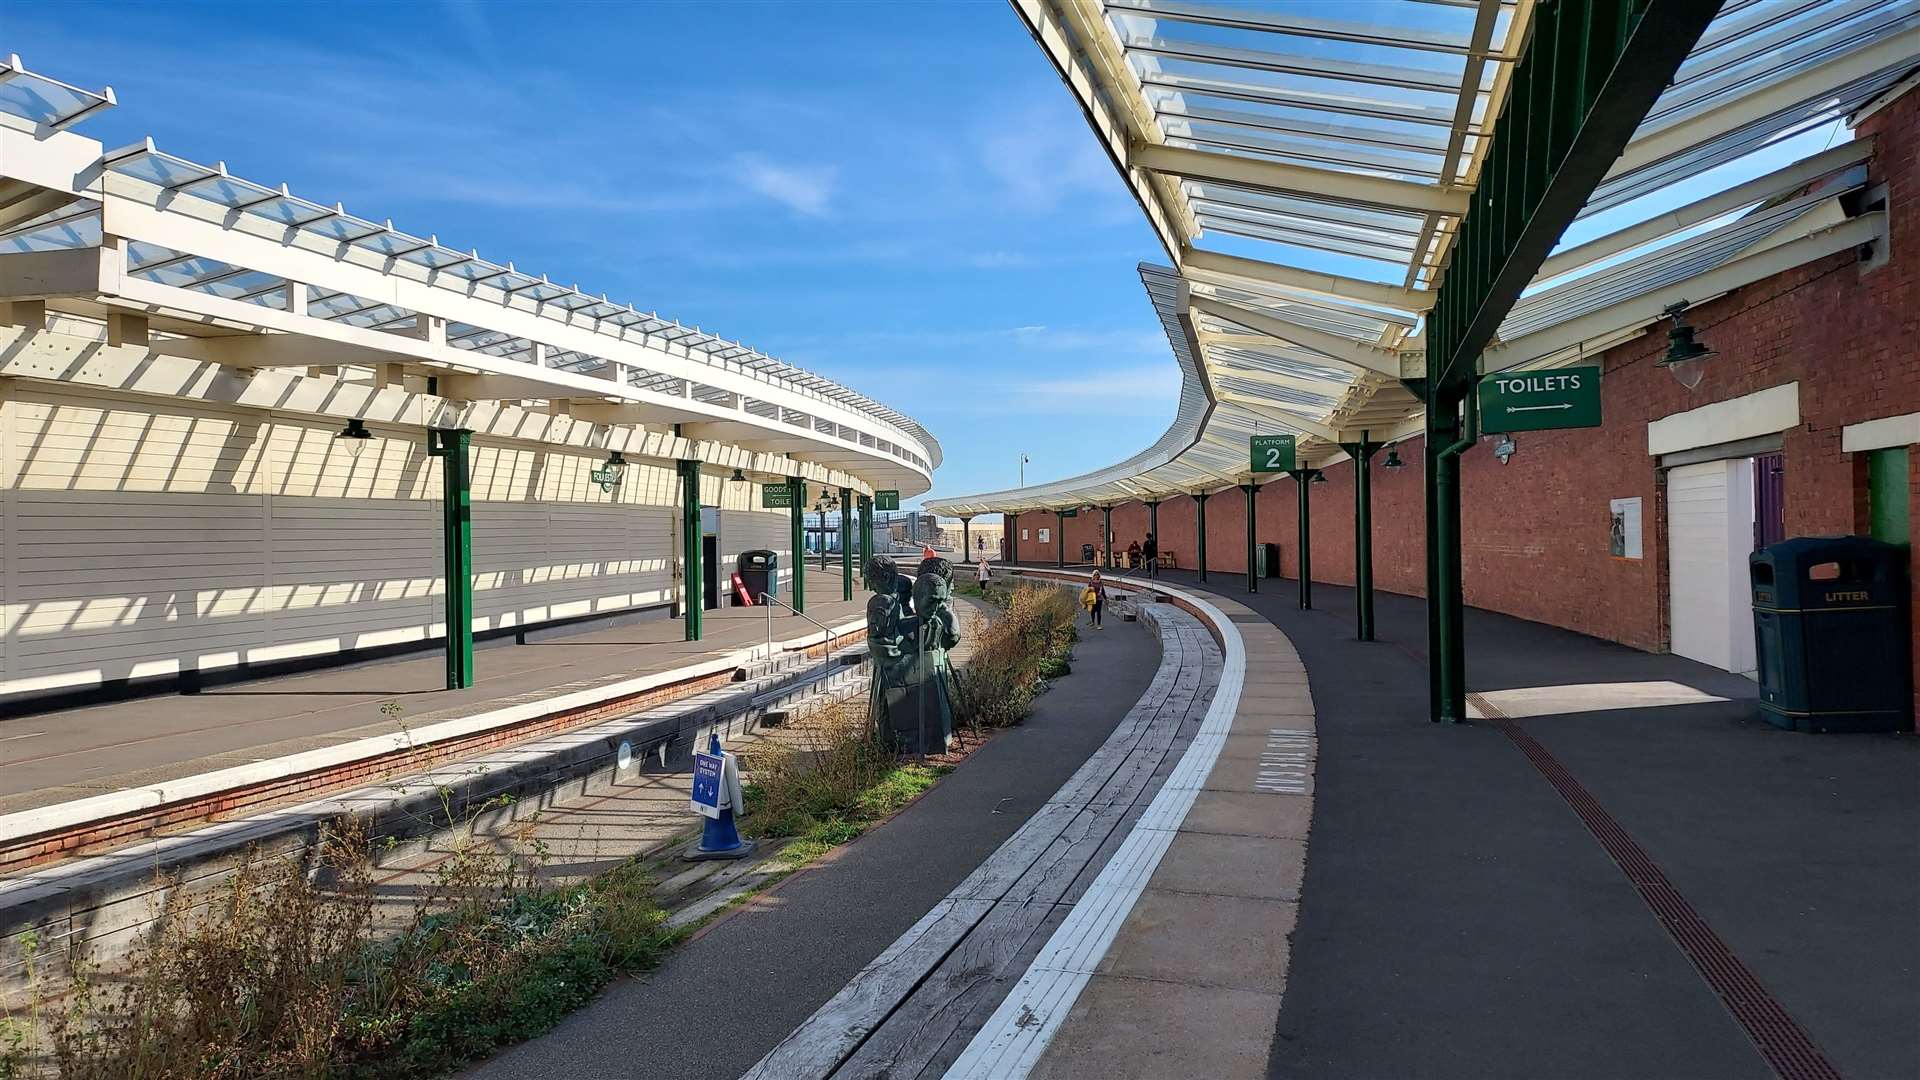 The Harbour Station was also renovated as part of the rejuvenation of the Harbour Arm in 2015